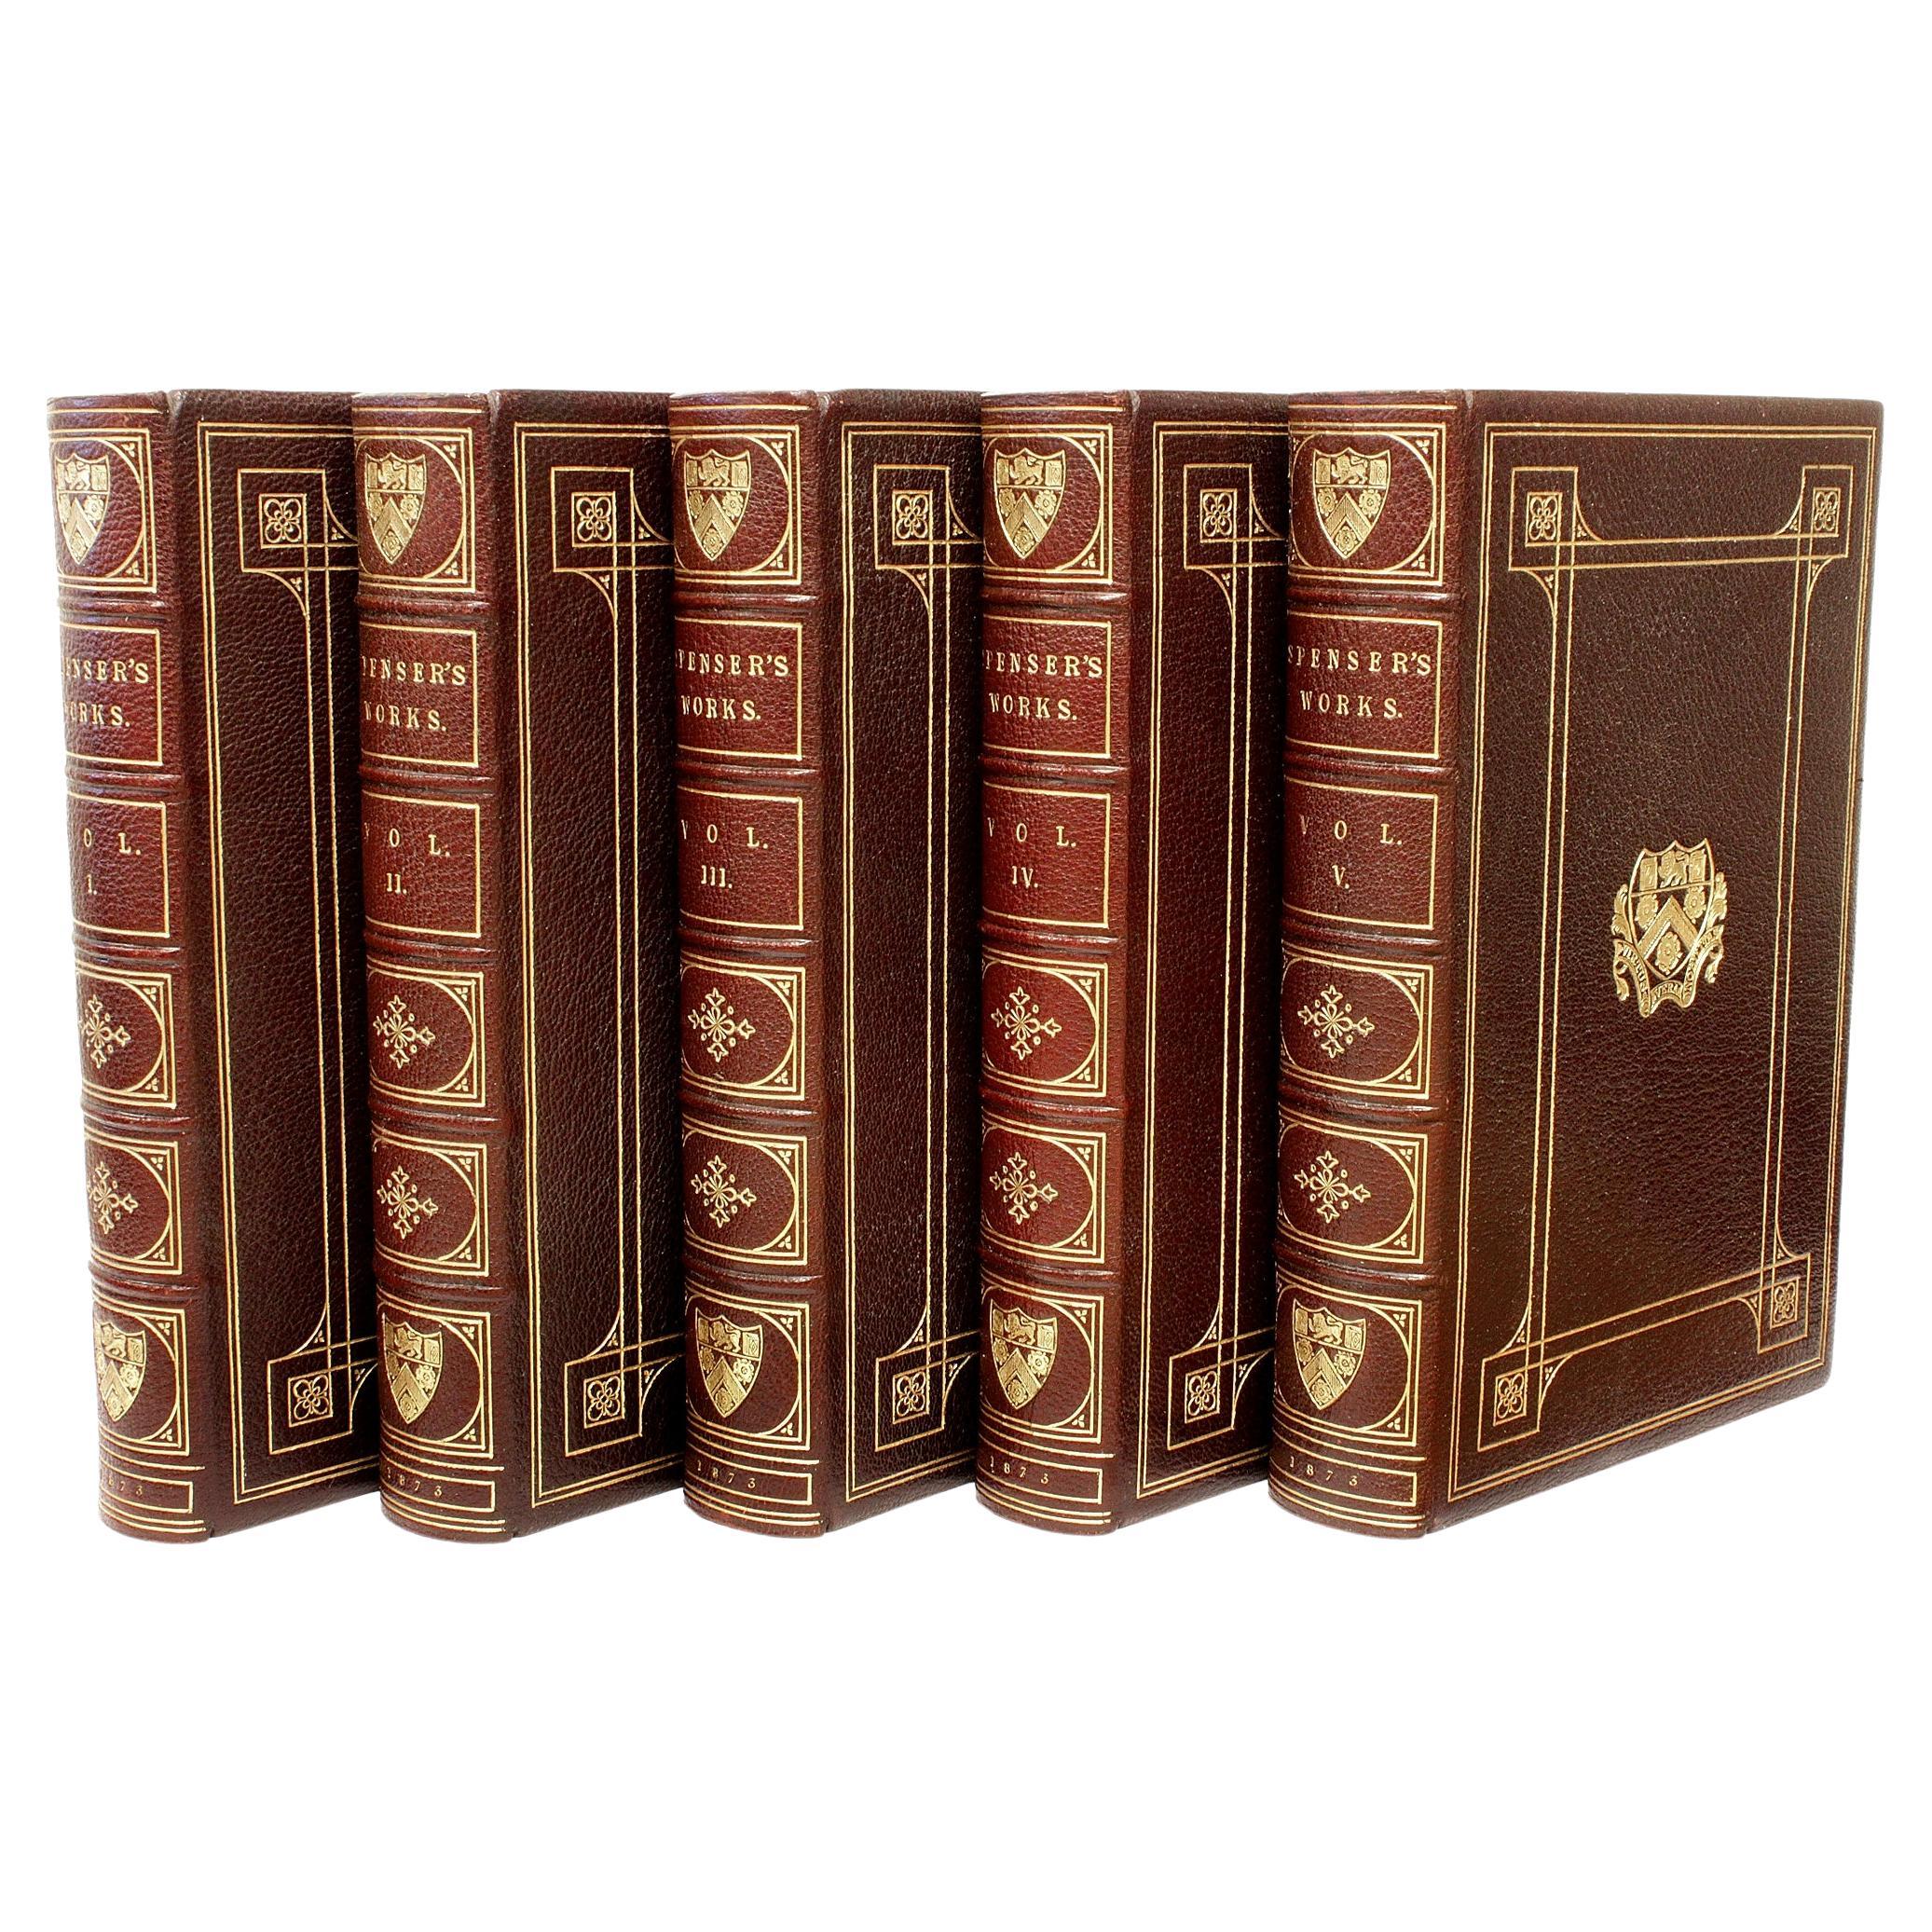 The Works Of Edmund Spenser. 5 VOLUMES - IN A FINE FULL LEATHER BINDING !